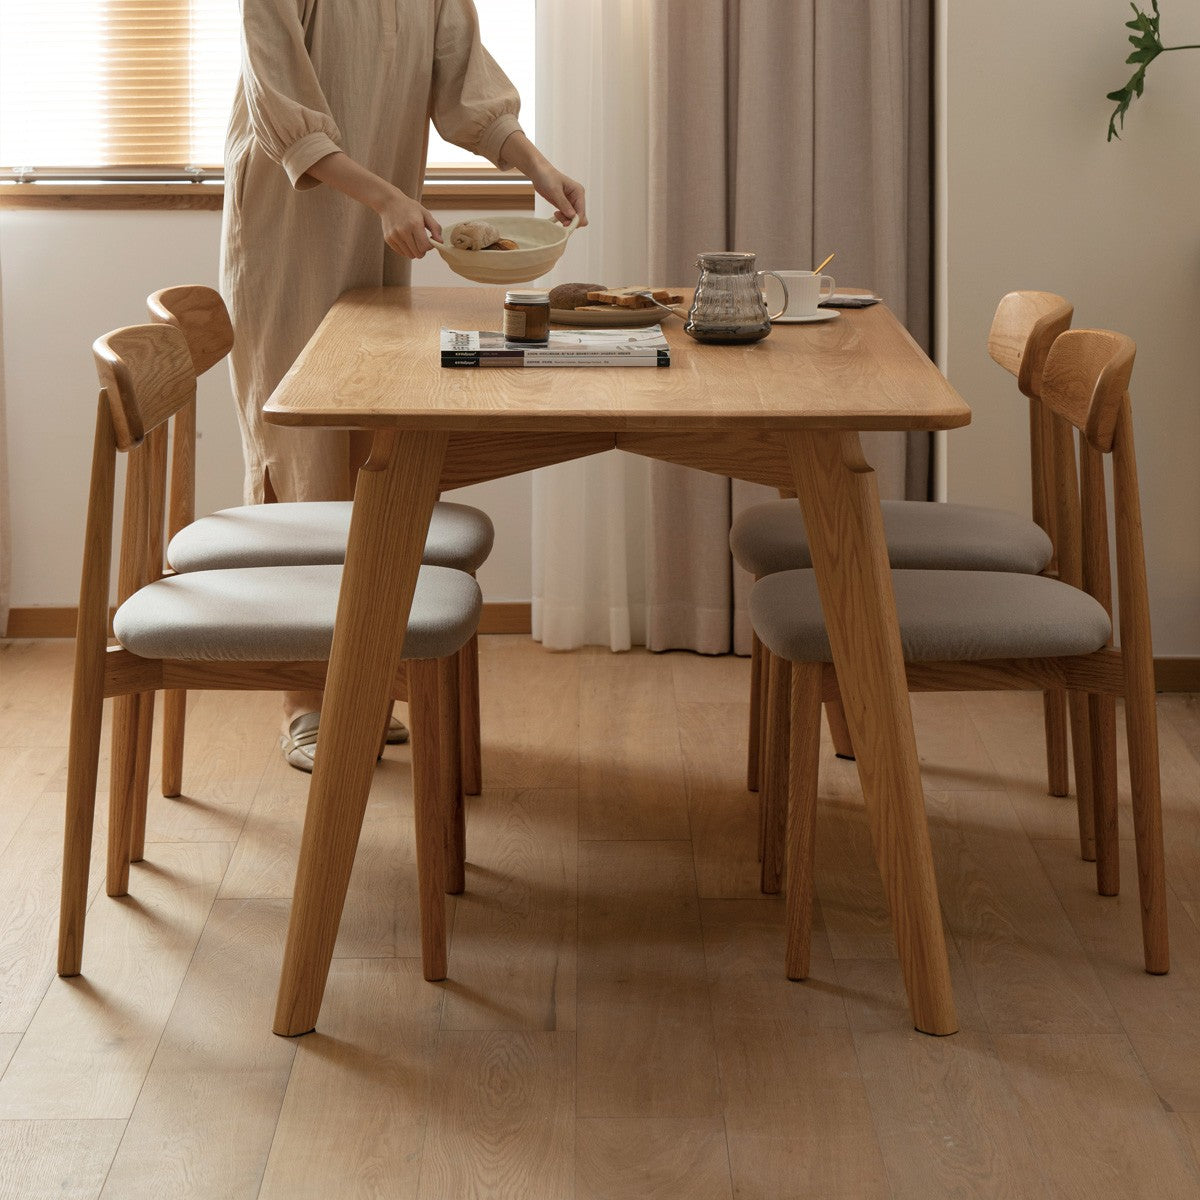 Oak solid wood dining table rectangular "